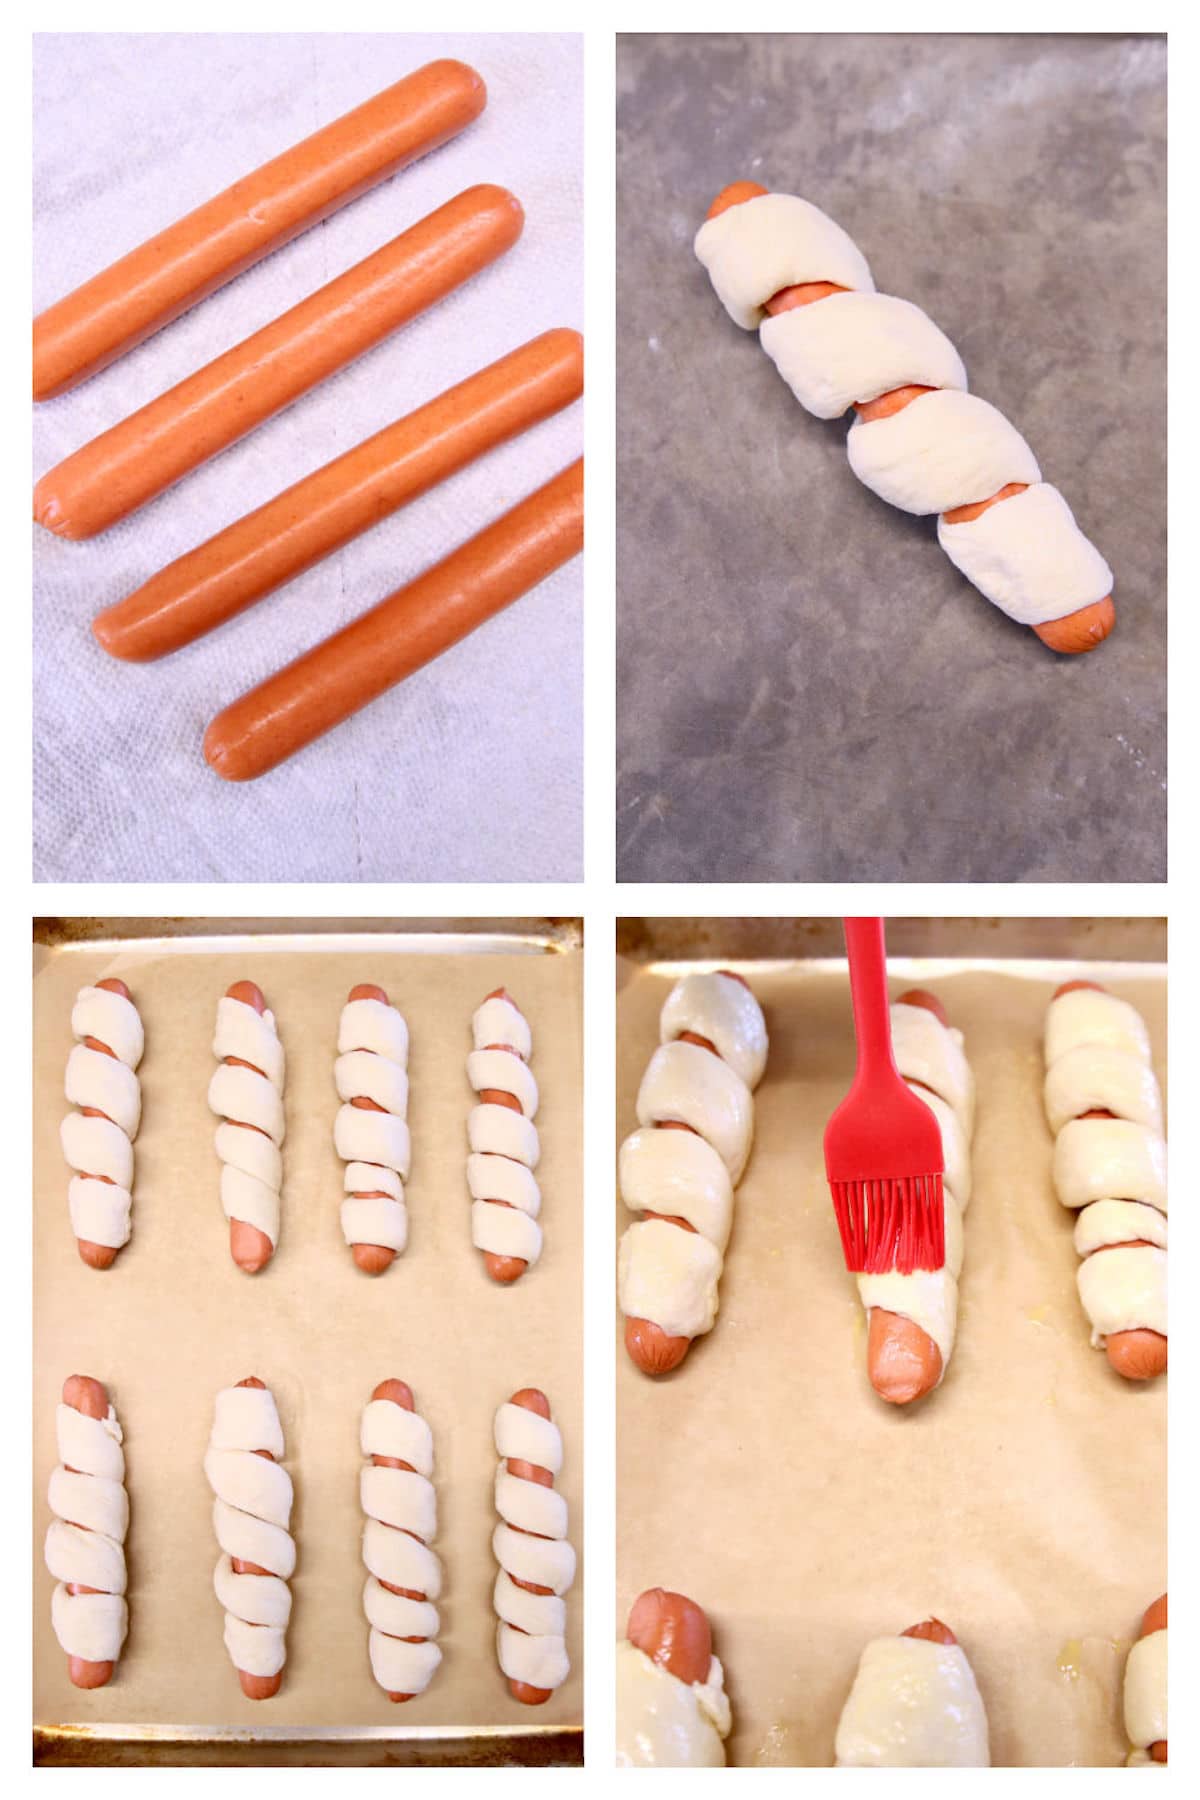 collage making pretzel dogs with hot dogs and homemade dough, brushing with egg wash.